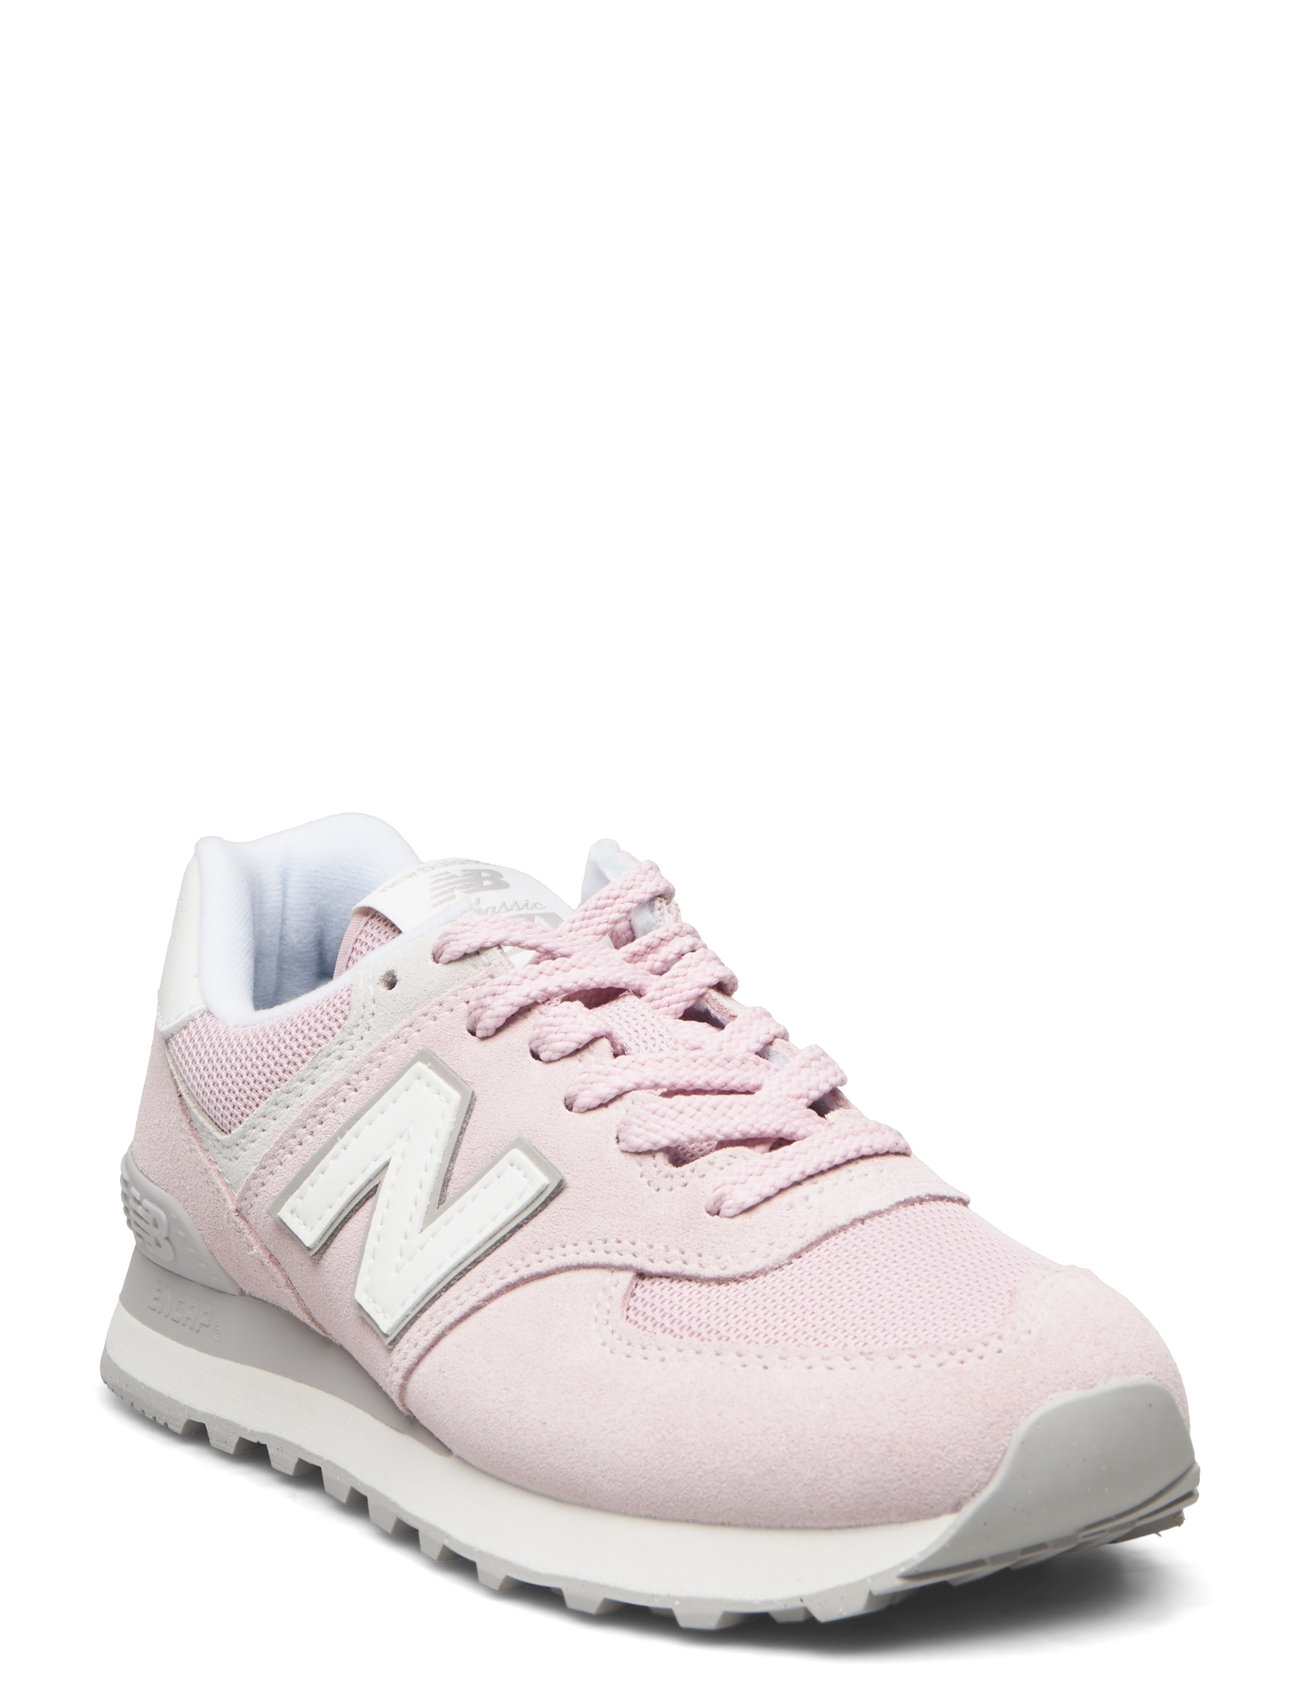 New Balance 574 Sport Sneakers Low-top Sneakers Pink New Balance